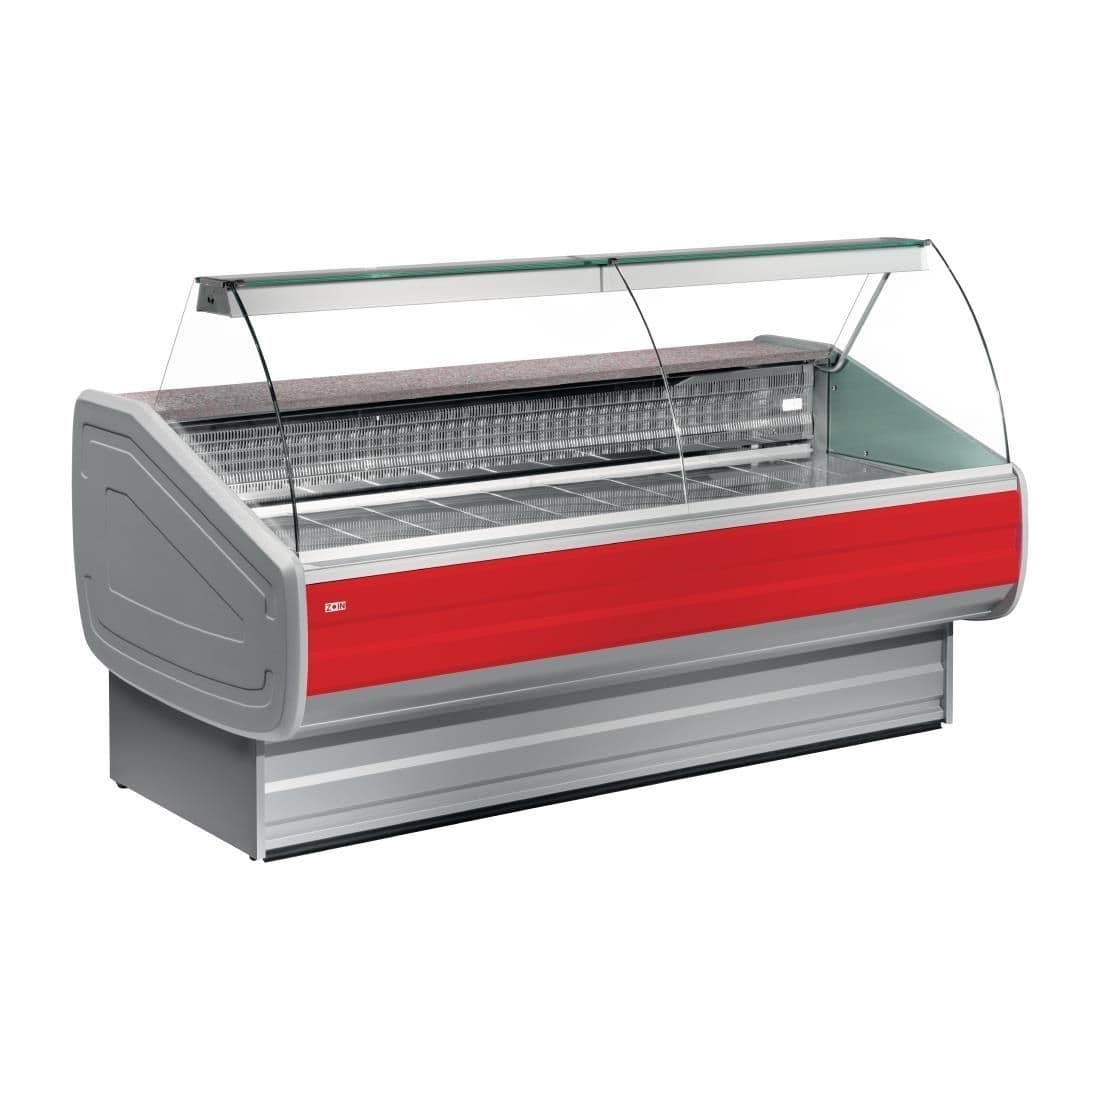 FP980-150 Zoin Melody Deli Serve Over Counter Chiller 1500mm MY150B JD Catering Equipment Solutions Ltd